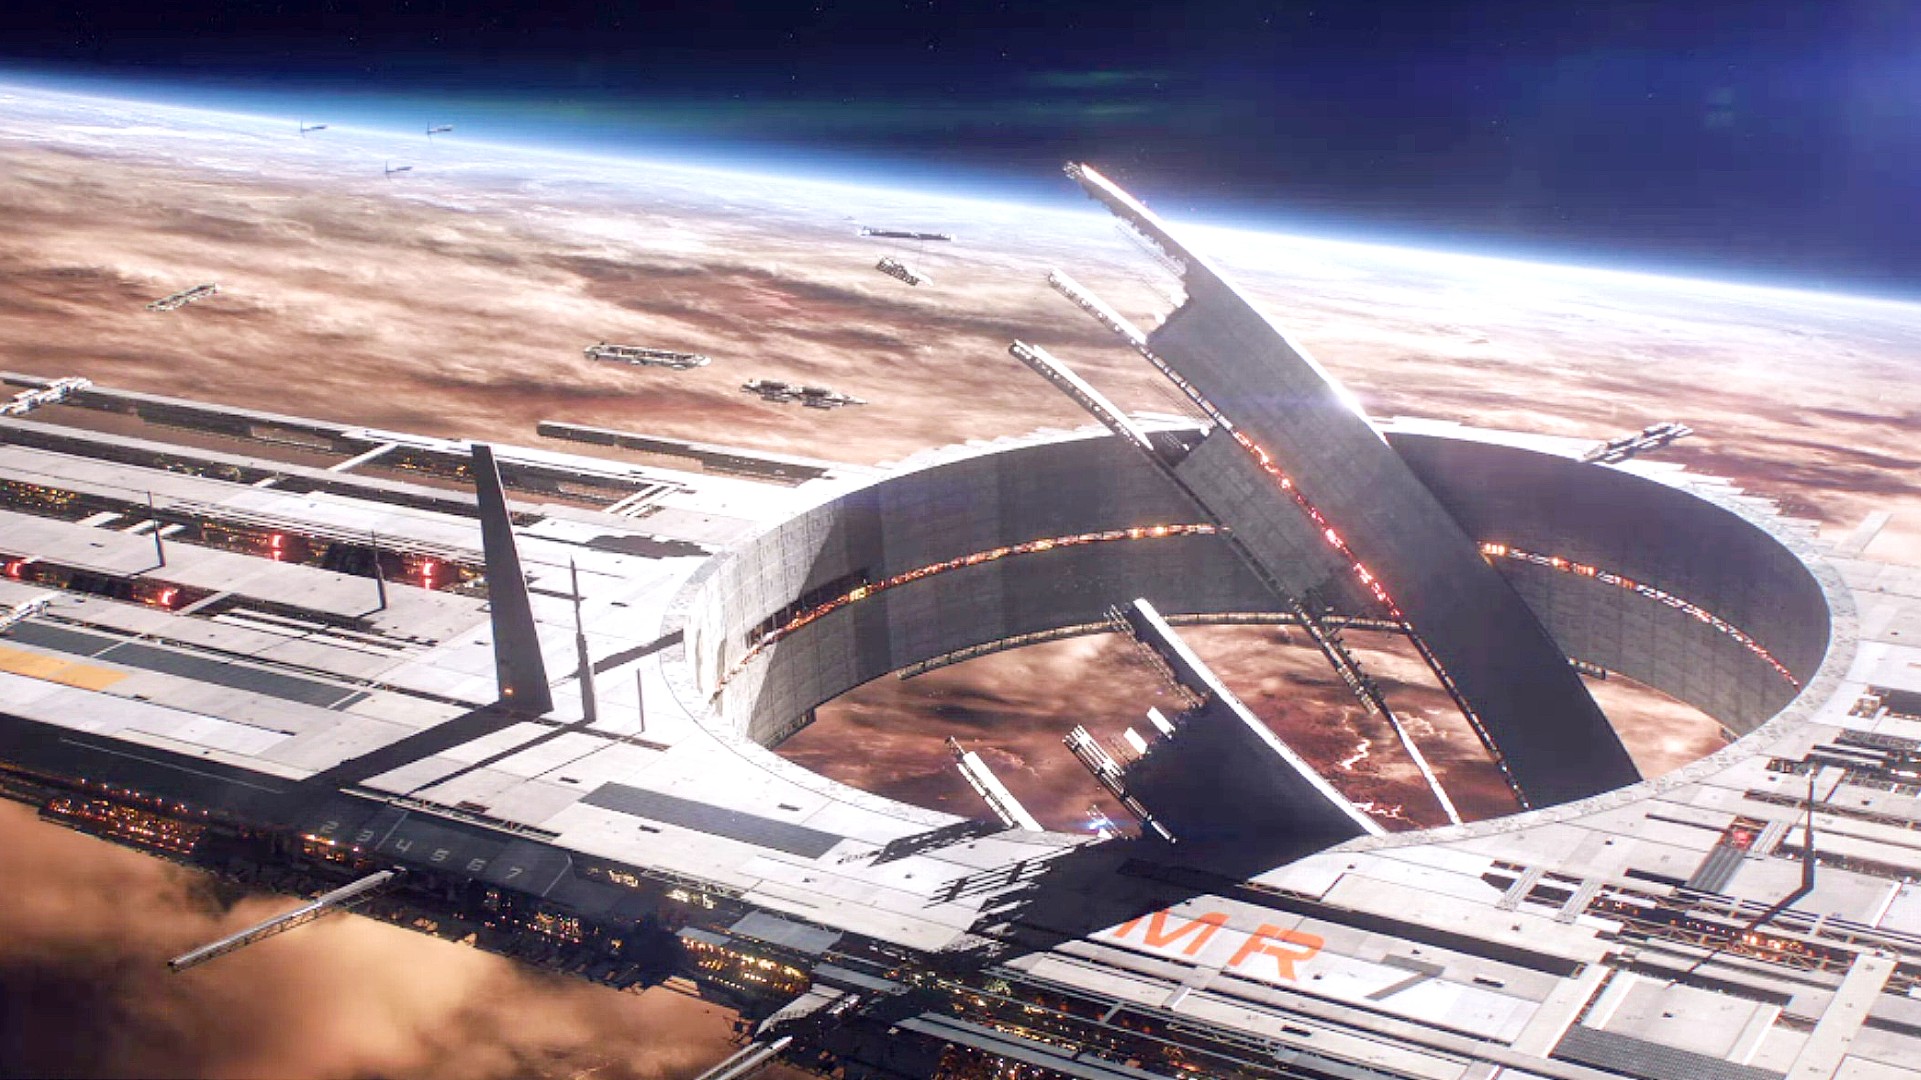 Mass Effect 5 hints at the restoration of hyperspace mass relays